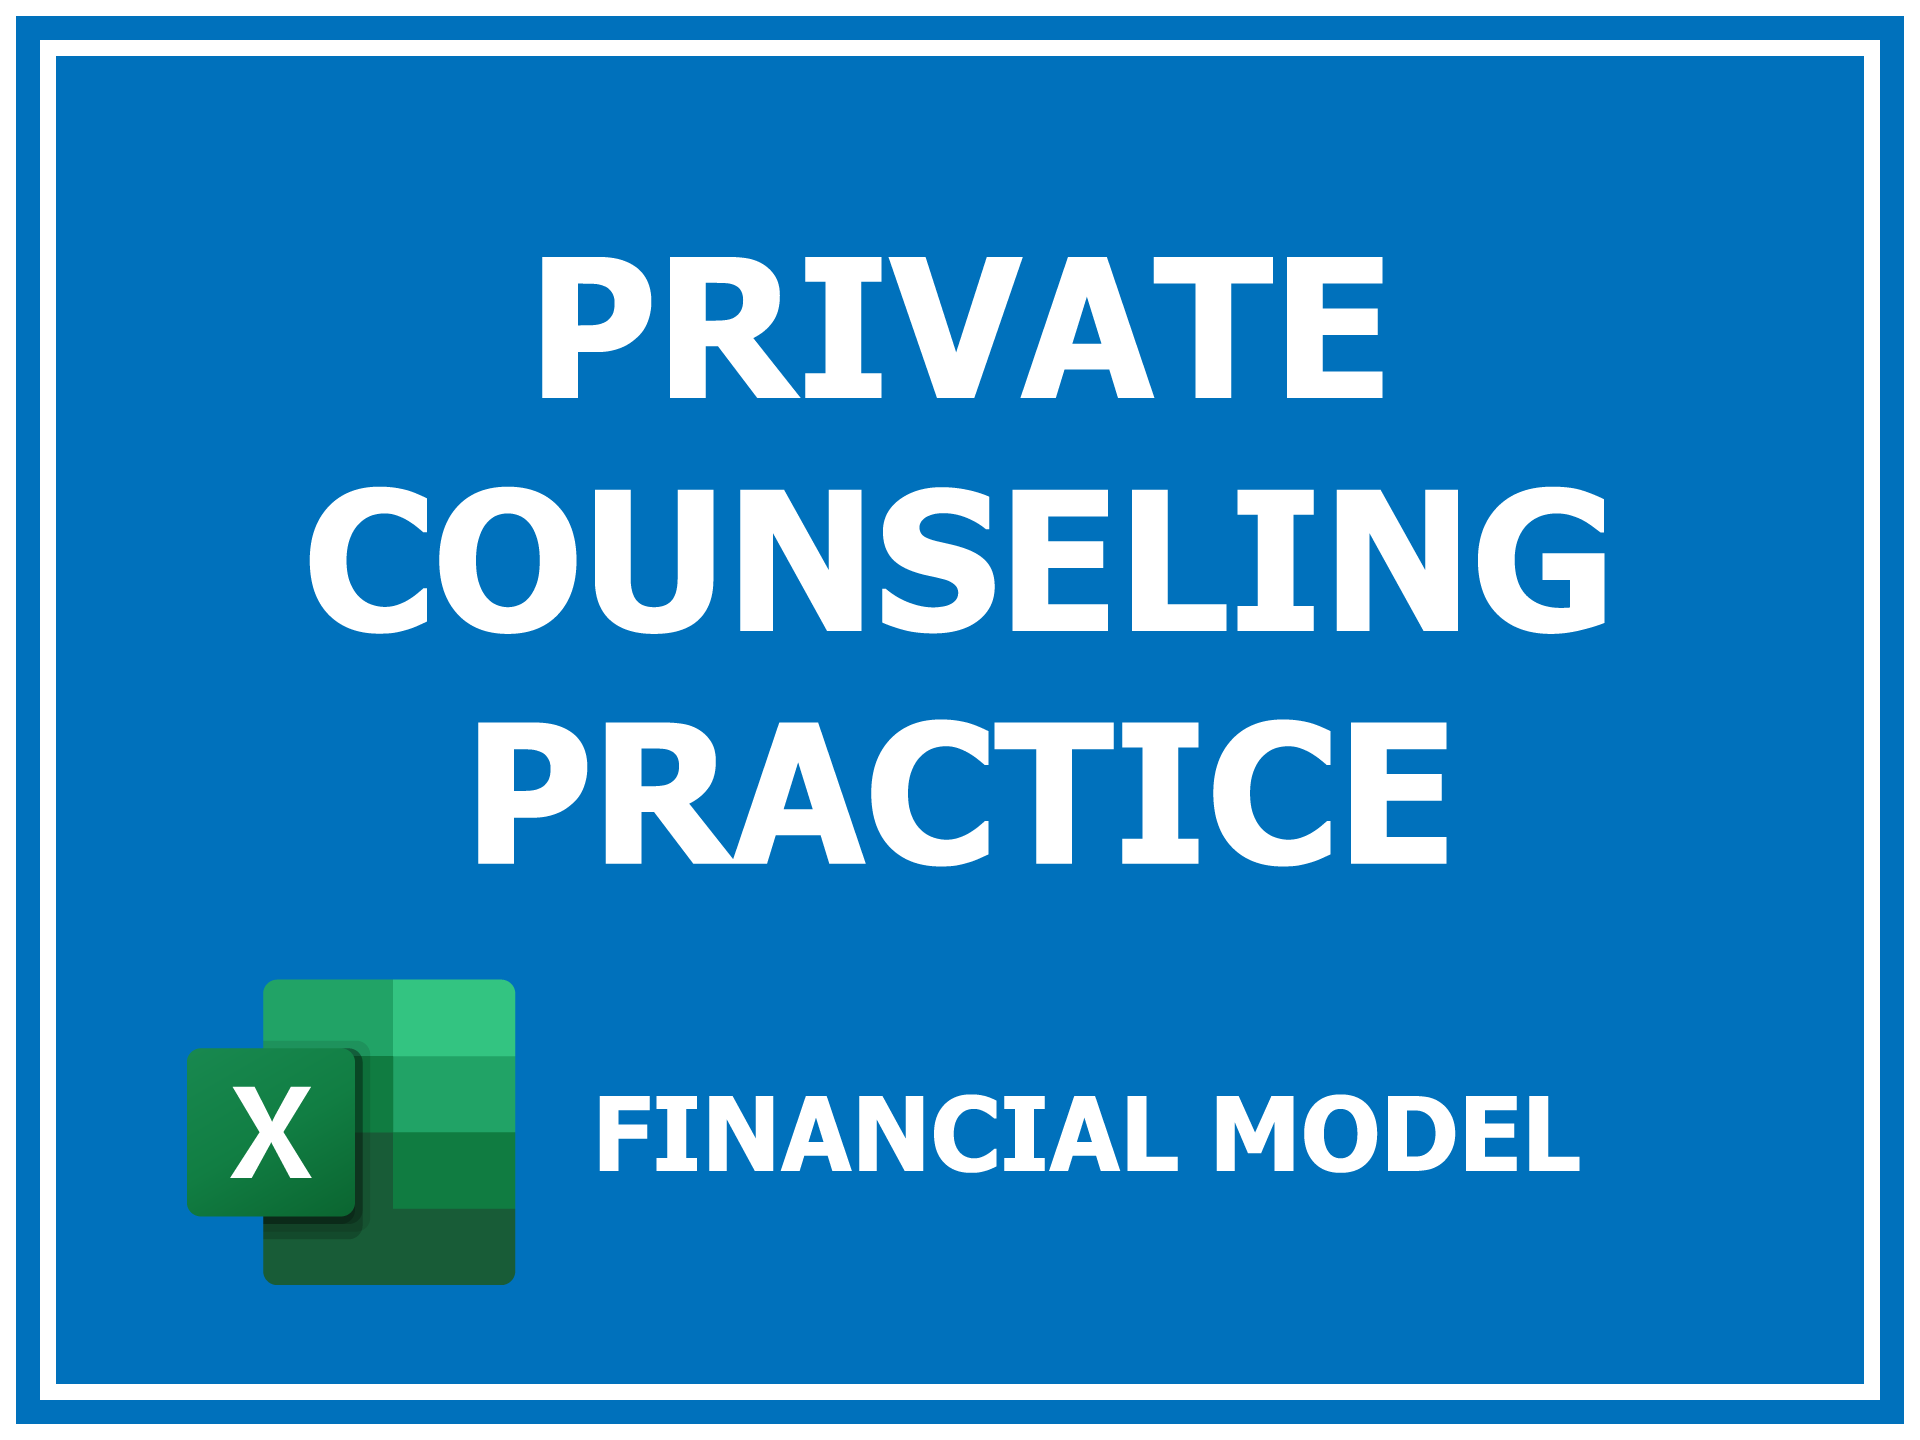 Private Counseling Practice